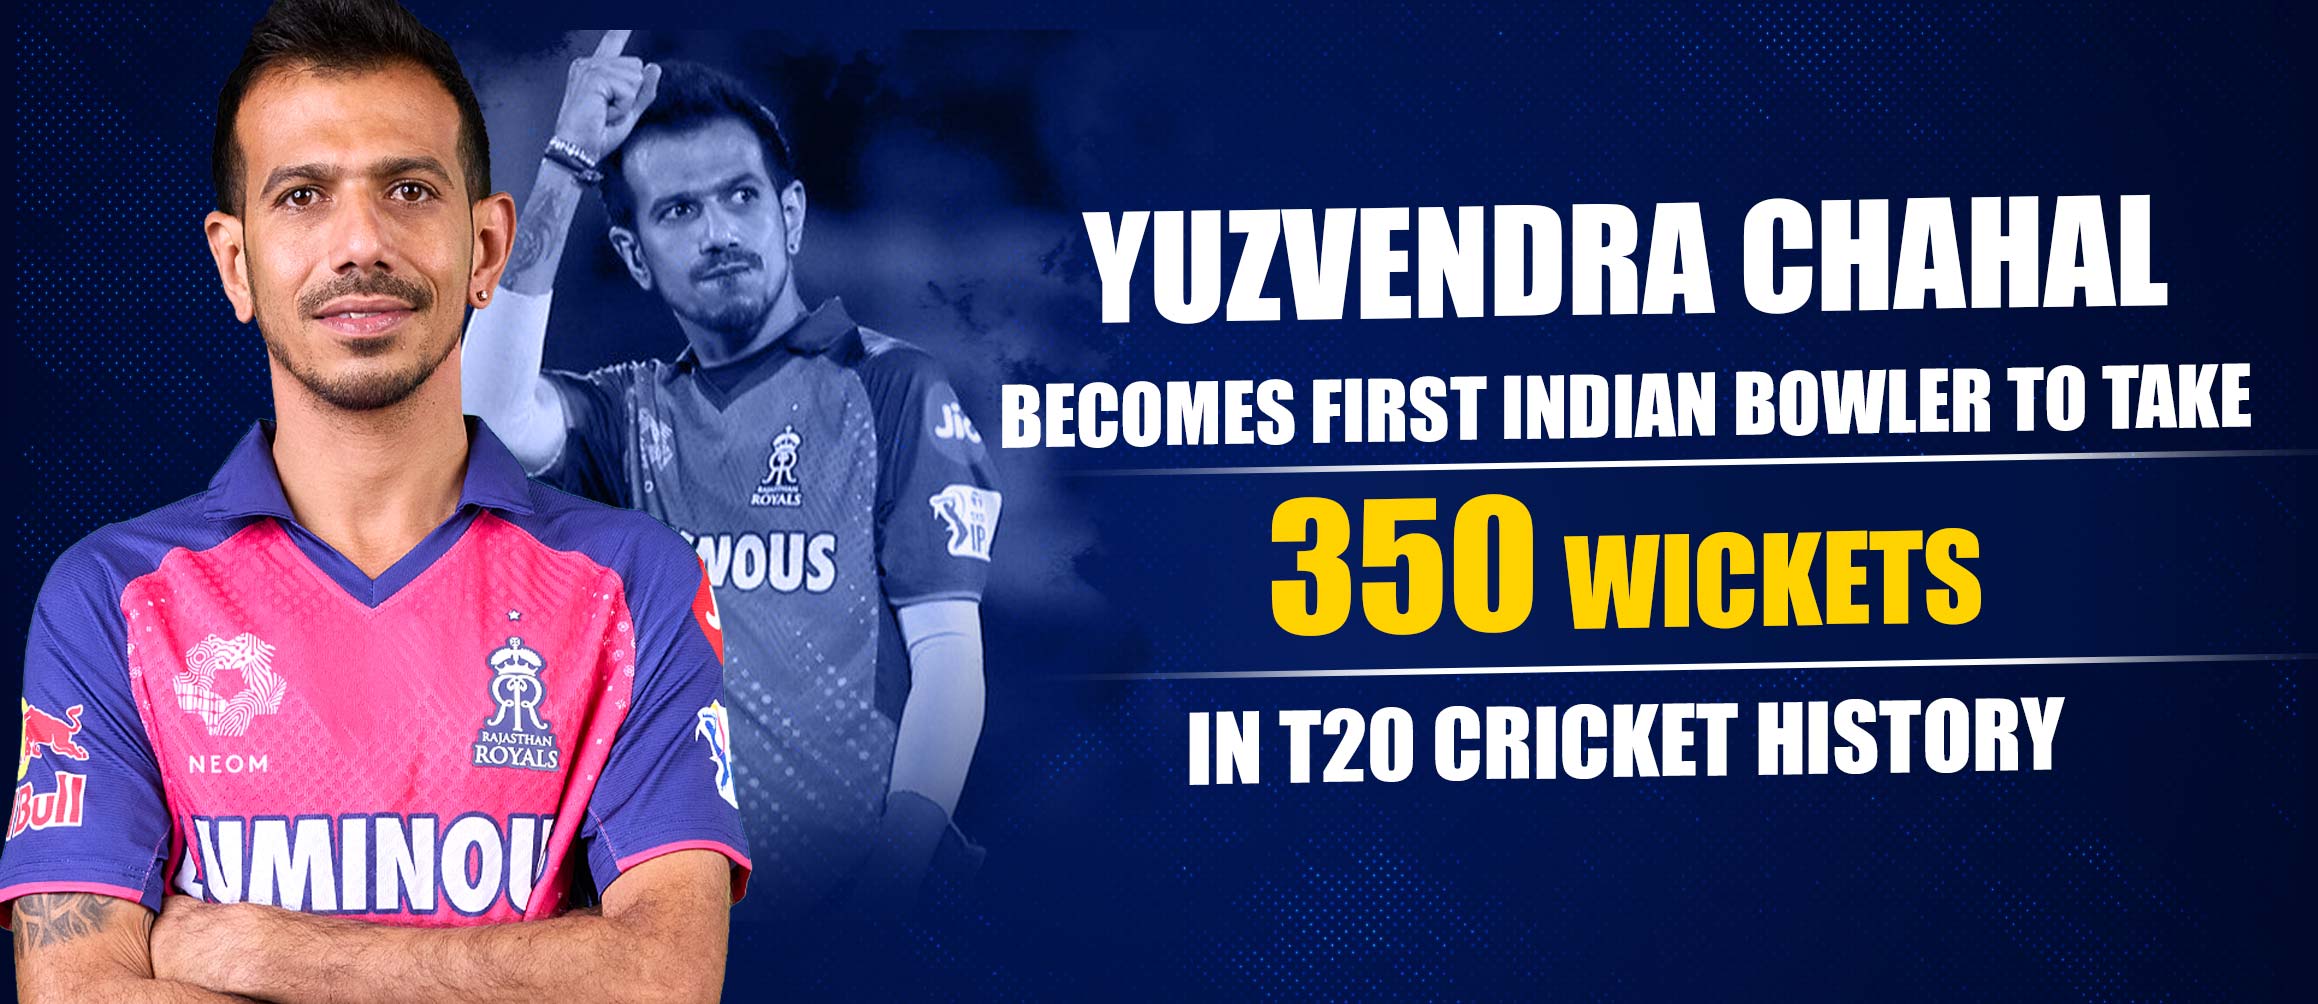 Yuzvendra Chahal Becomes First Indian Bowler to Take 350 Wickets in T20 Cricket History